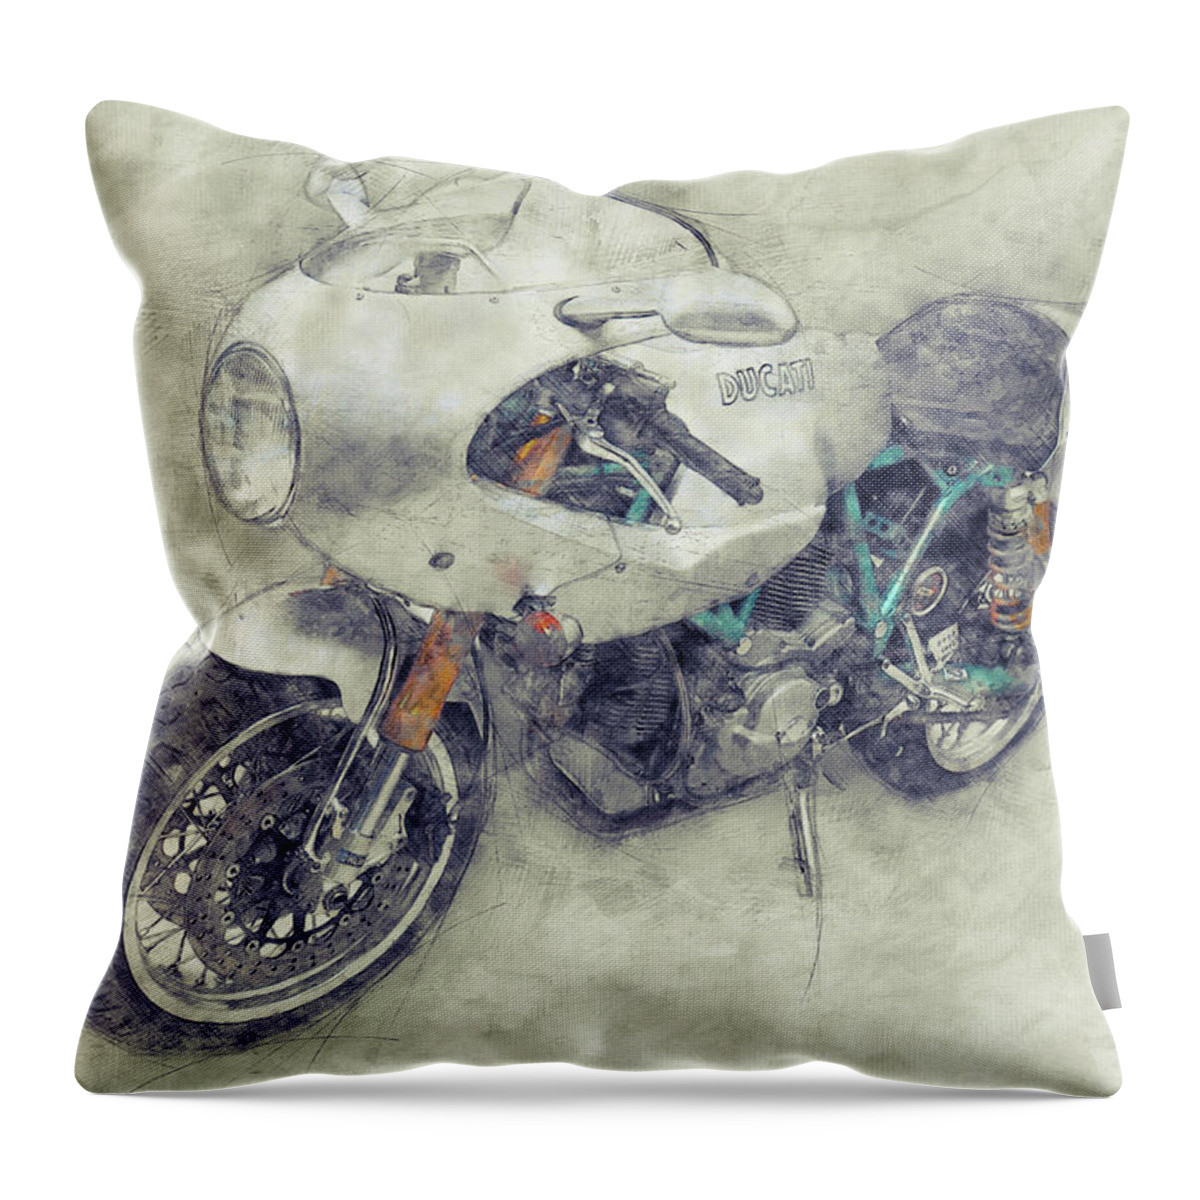 Ducati Paulsmart 1000 Le Throw Pillow featuring the mixed media Ducati PaulSmart 1000 LE 1 - 2006 - Motorcycle Poster - Automotive Art by Studio Grafiikka